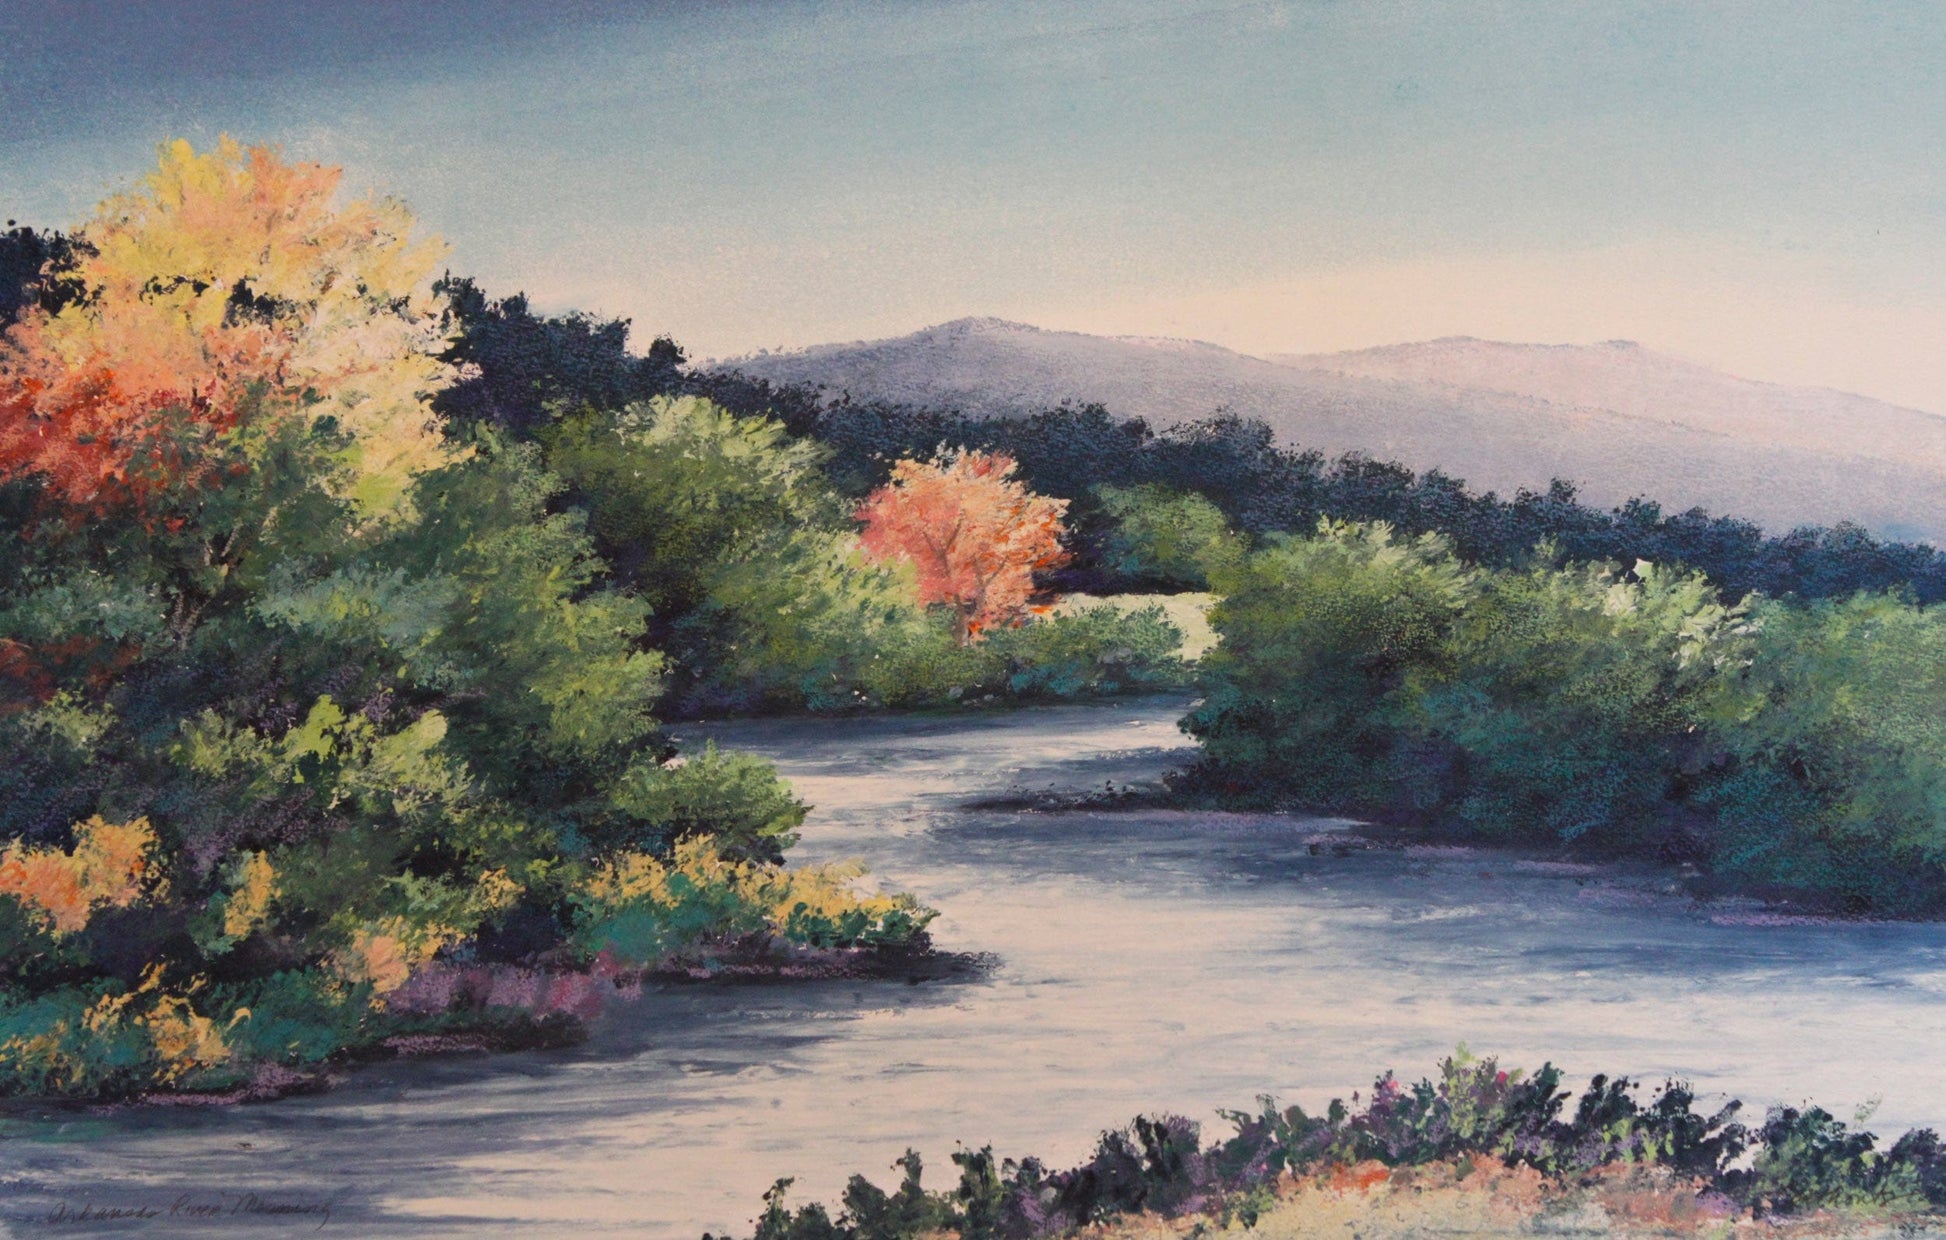 Peggy Corthouts Arkansas River Morning Art Works Gallery